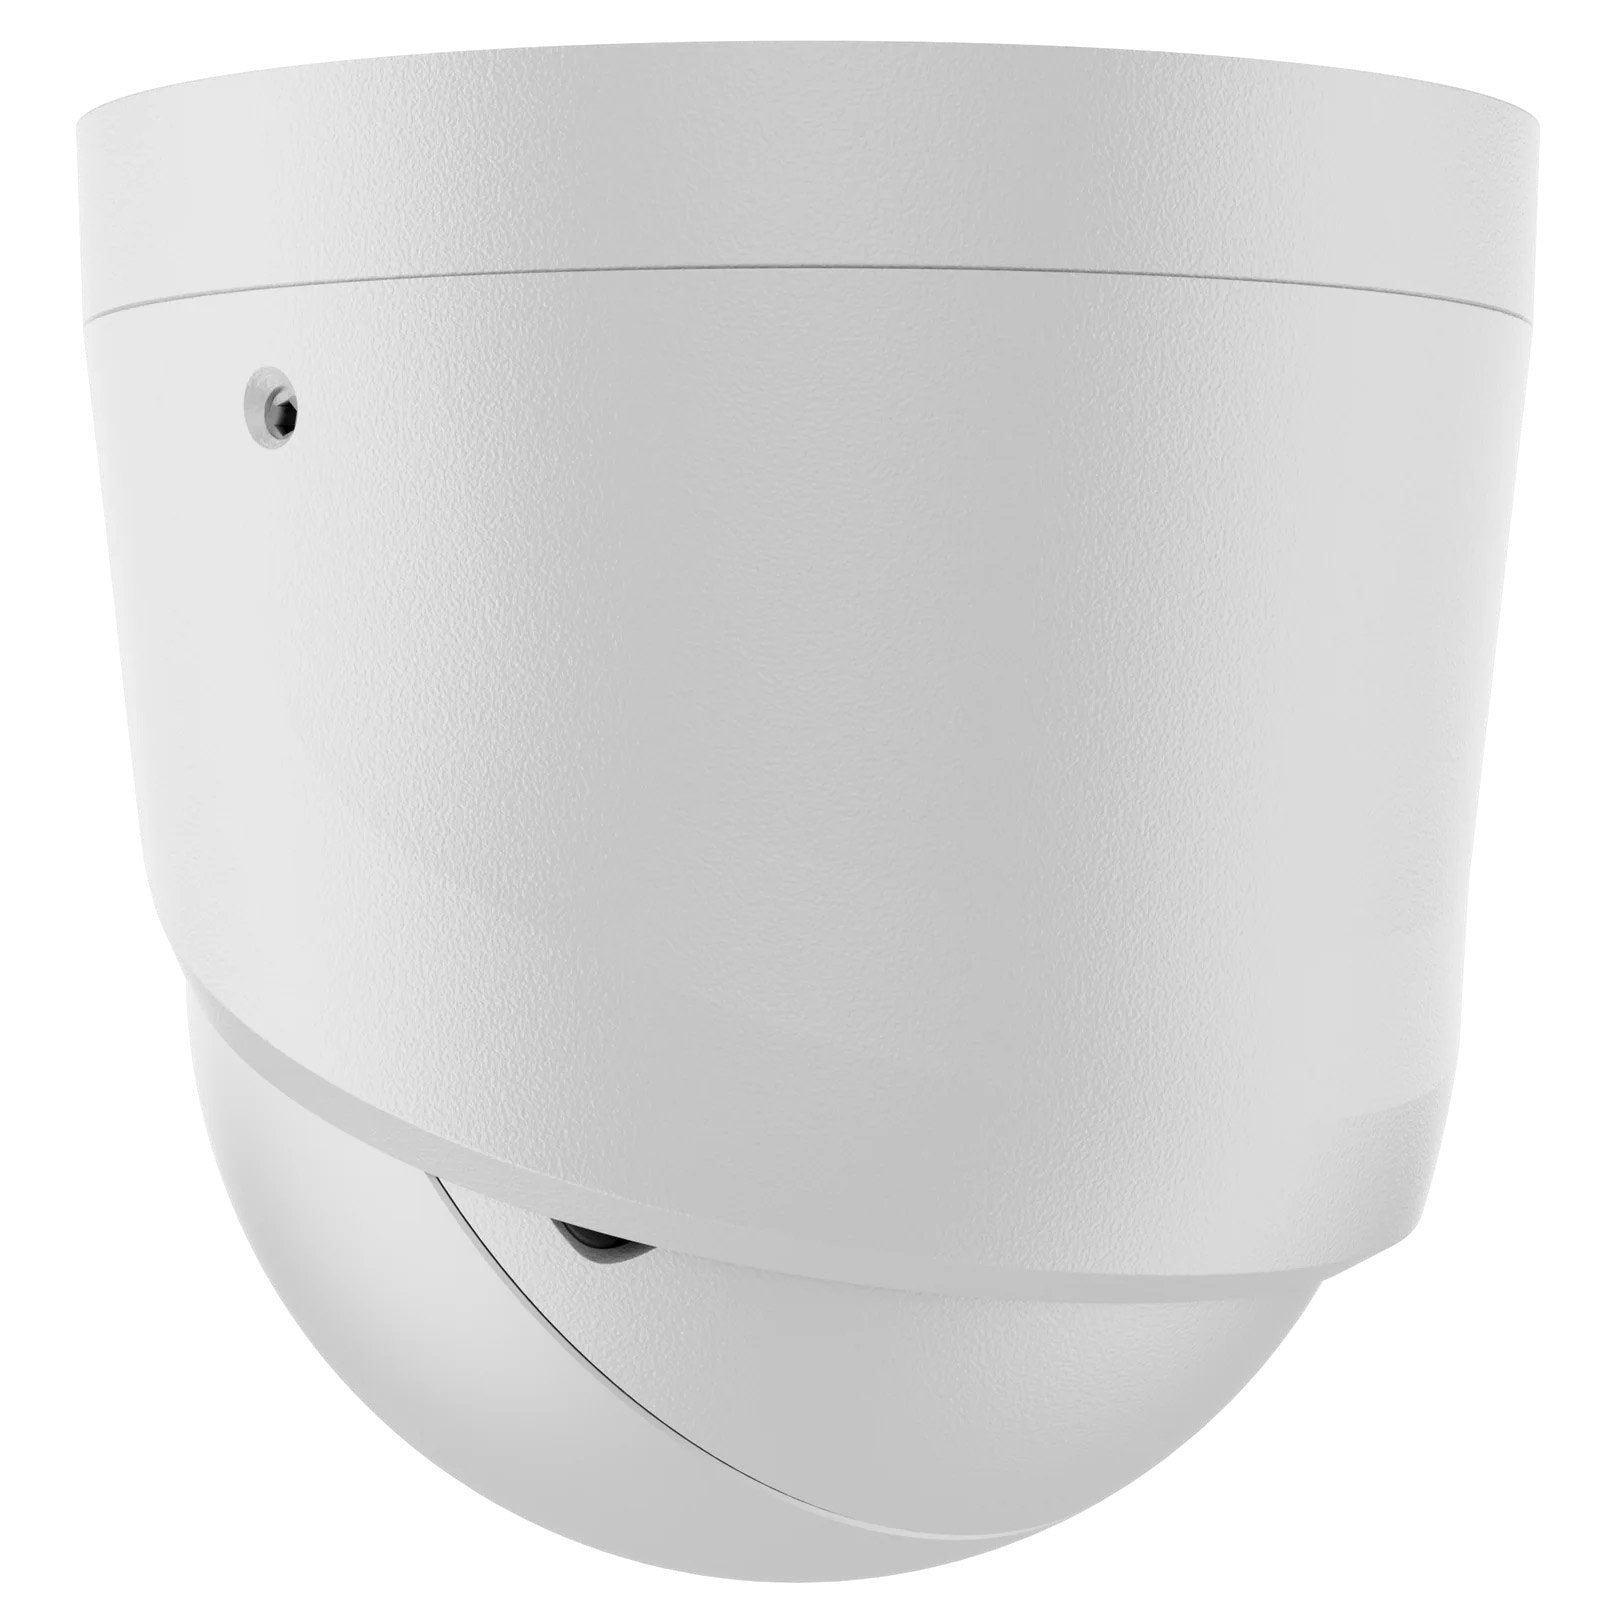 **SUPPLY DELAY (TBC)** Ajax 5MP IP Baseline AI Series IR Turret Camera, AI-Powered Object Recognition, 2.8mm, 120dB WDR, 35m IR, POE / 12VDC, IP65, MicroSD, Built-in Mic